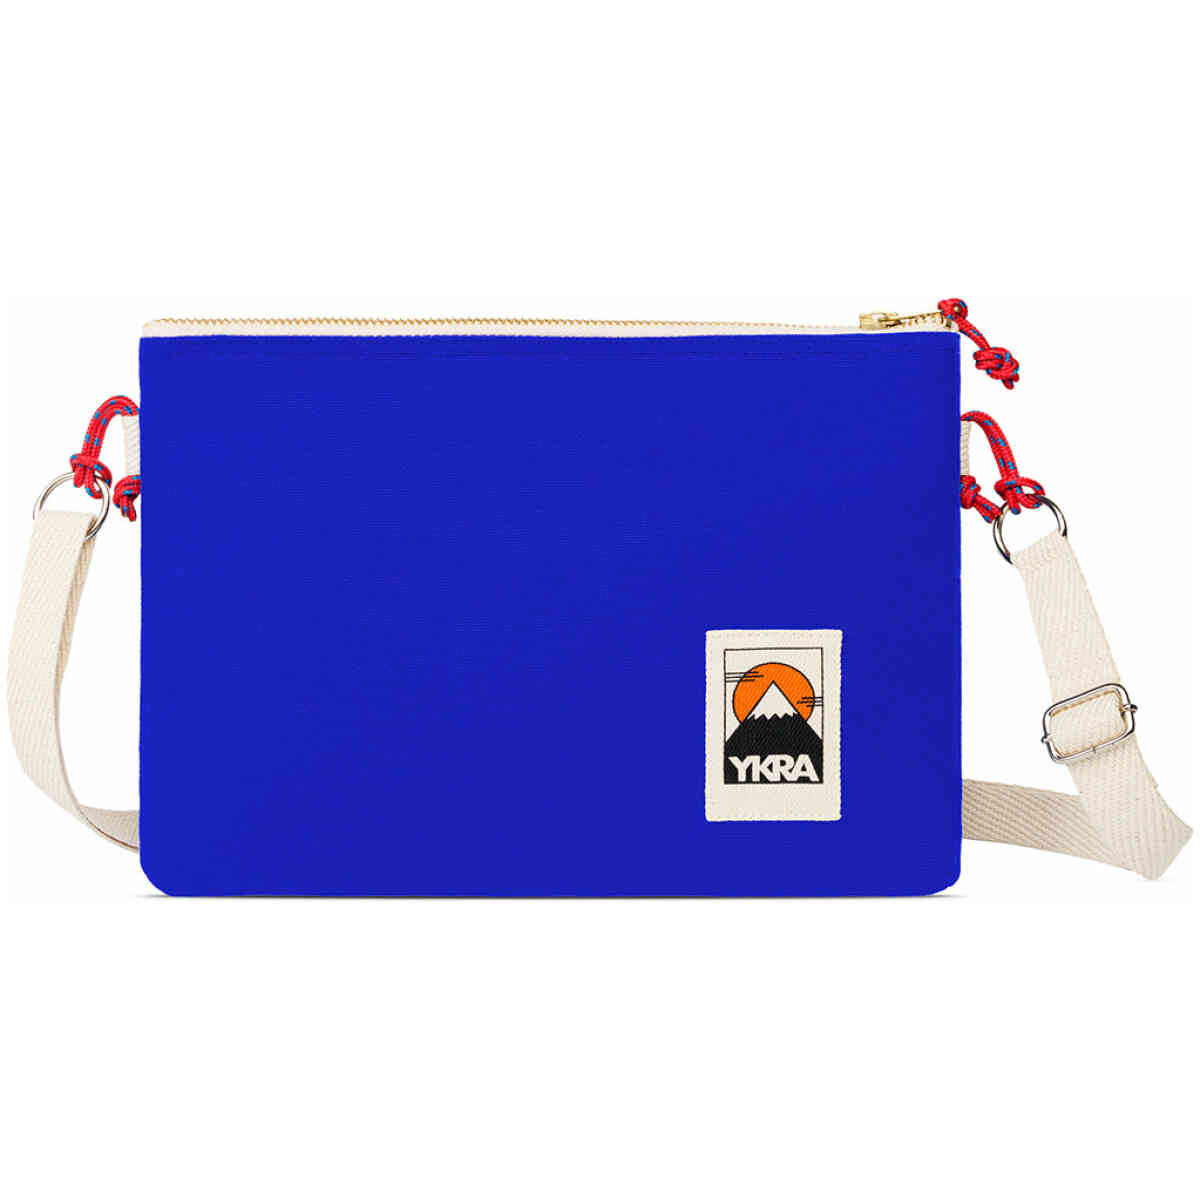 ykra sidepouch front blue